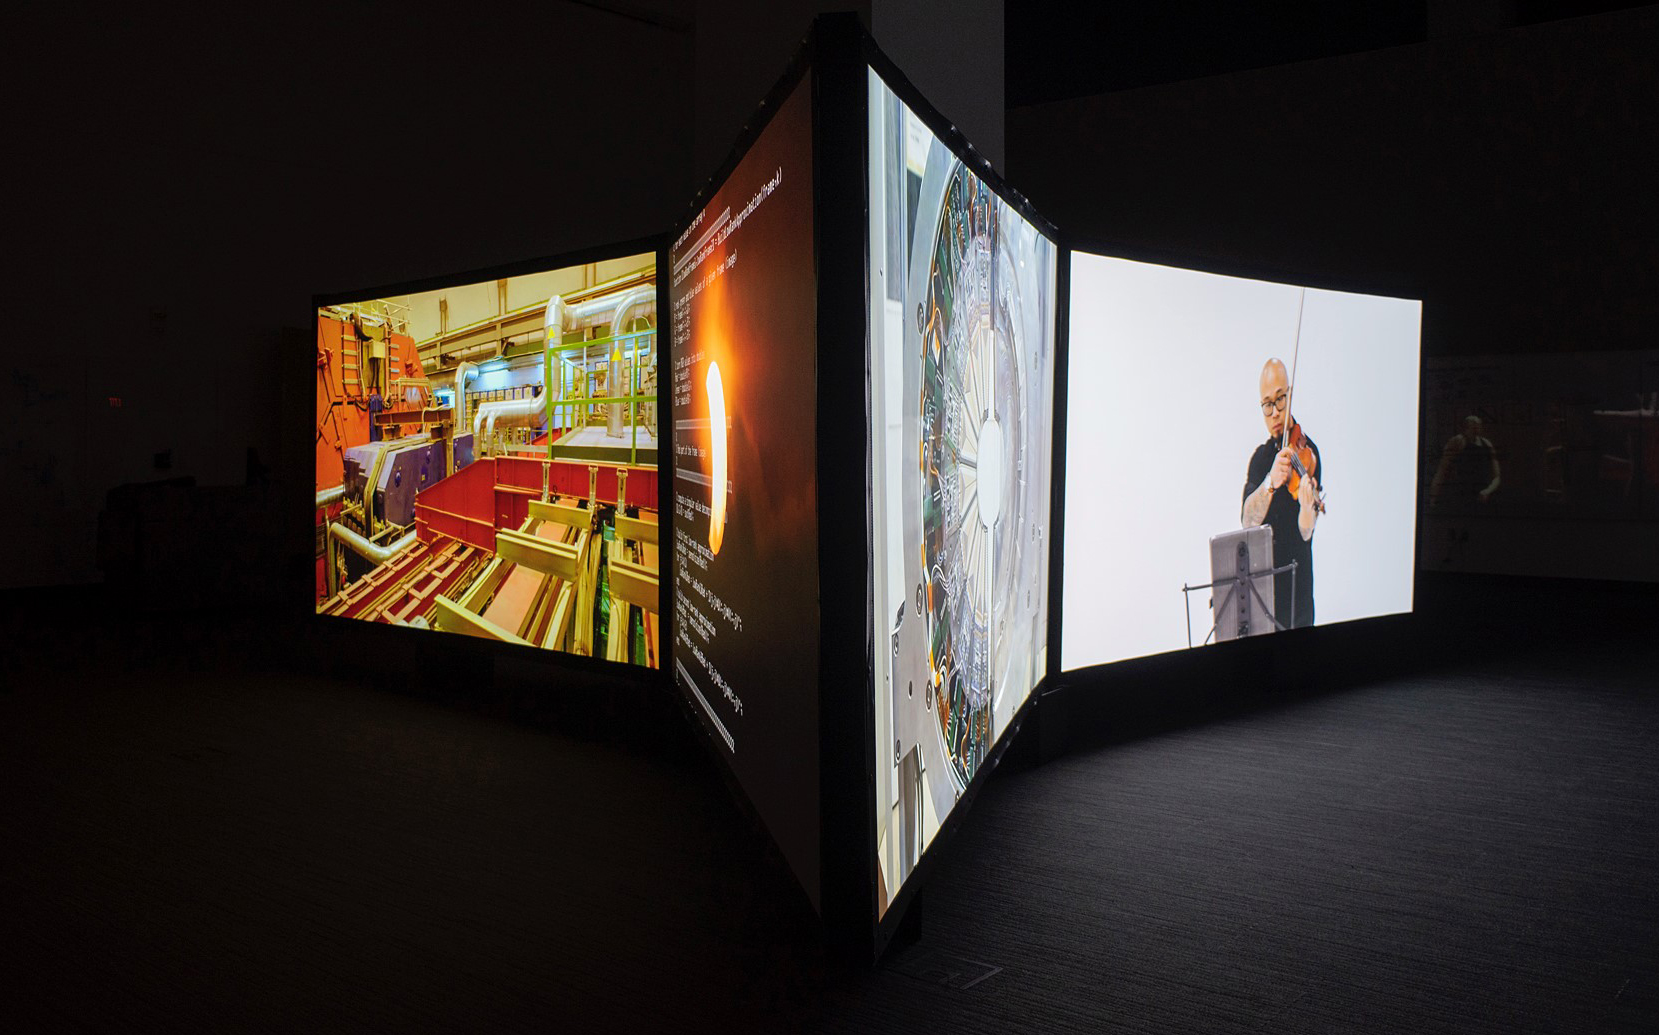 &lt;strong&gt;Figure 2.&lt;/strong&gt; Artist Janet Biggs, mathematician Agnieszka Międlar, and physicist Daniel Tapia Takaki debuted the Collective Entanglements exhibition at the University of Kansas’ Spencer Museum of Art in 2022. The experience included a six-channel video installation with sound, as well as interactive whiteboards for visitors. Photo by Ryan Waggoner © Spencer Museum of Art.